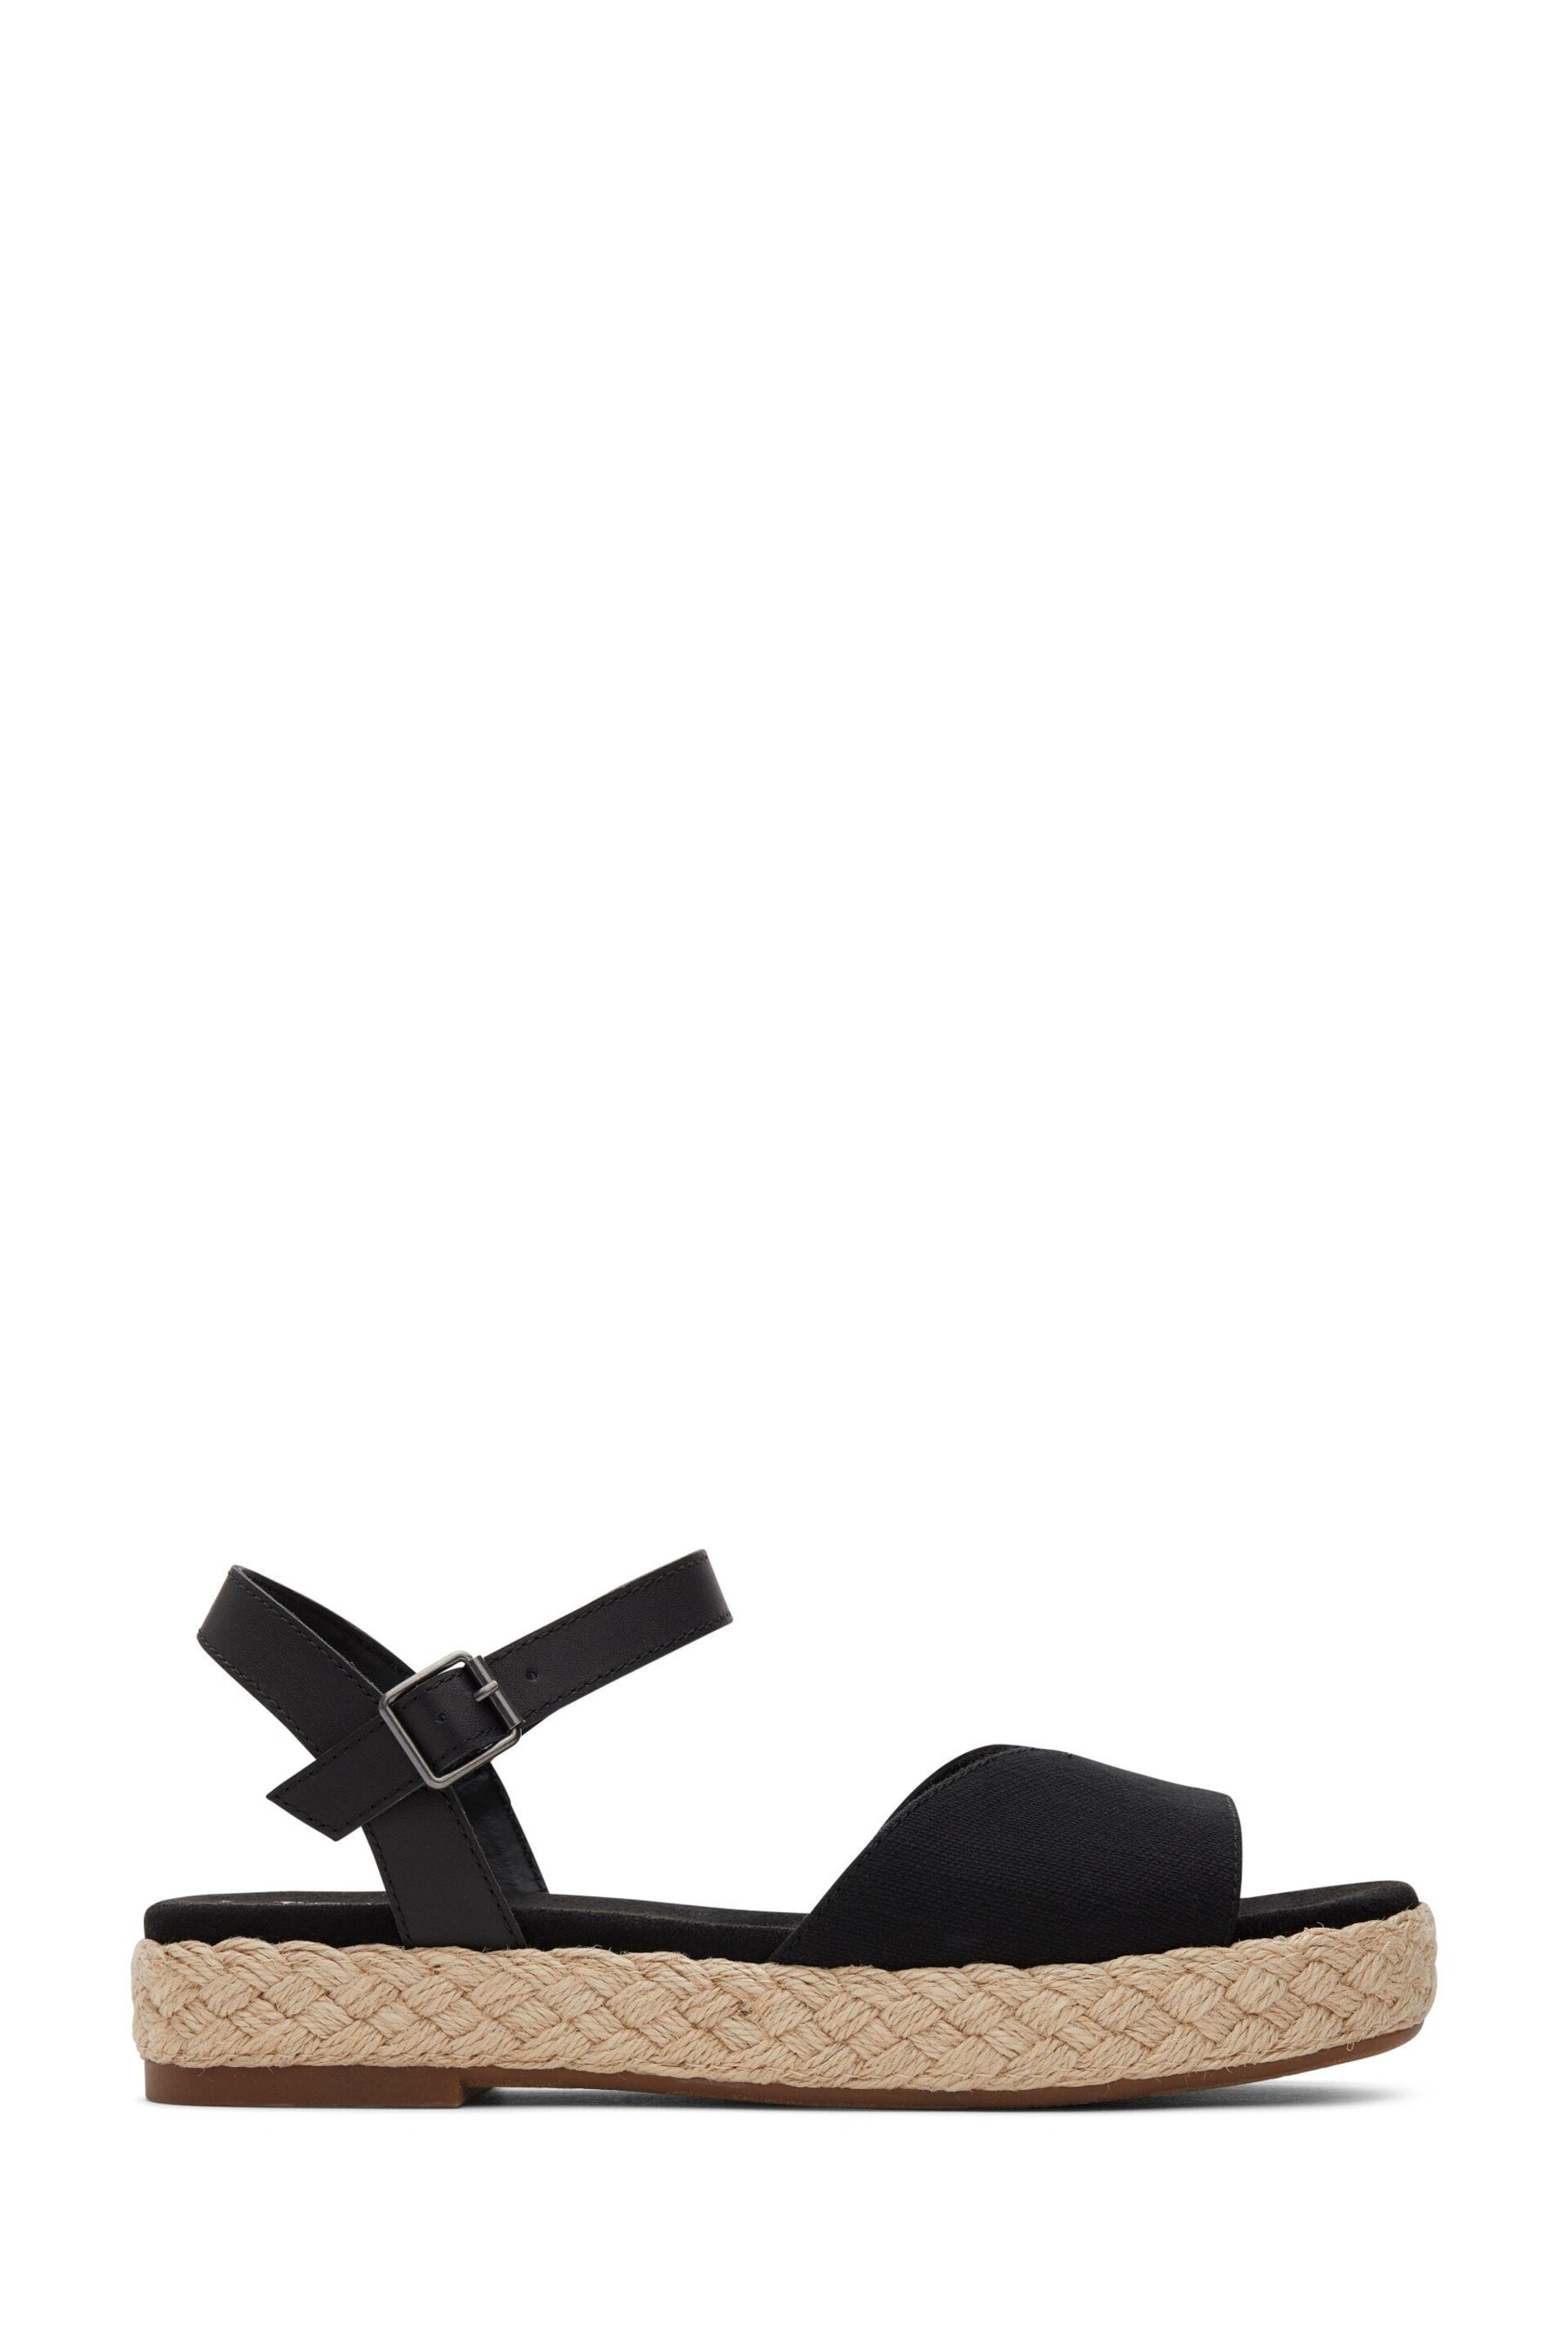 TOMS Abby Black Sandals In  Woven - Image 1 of 6